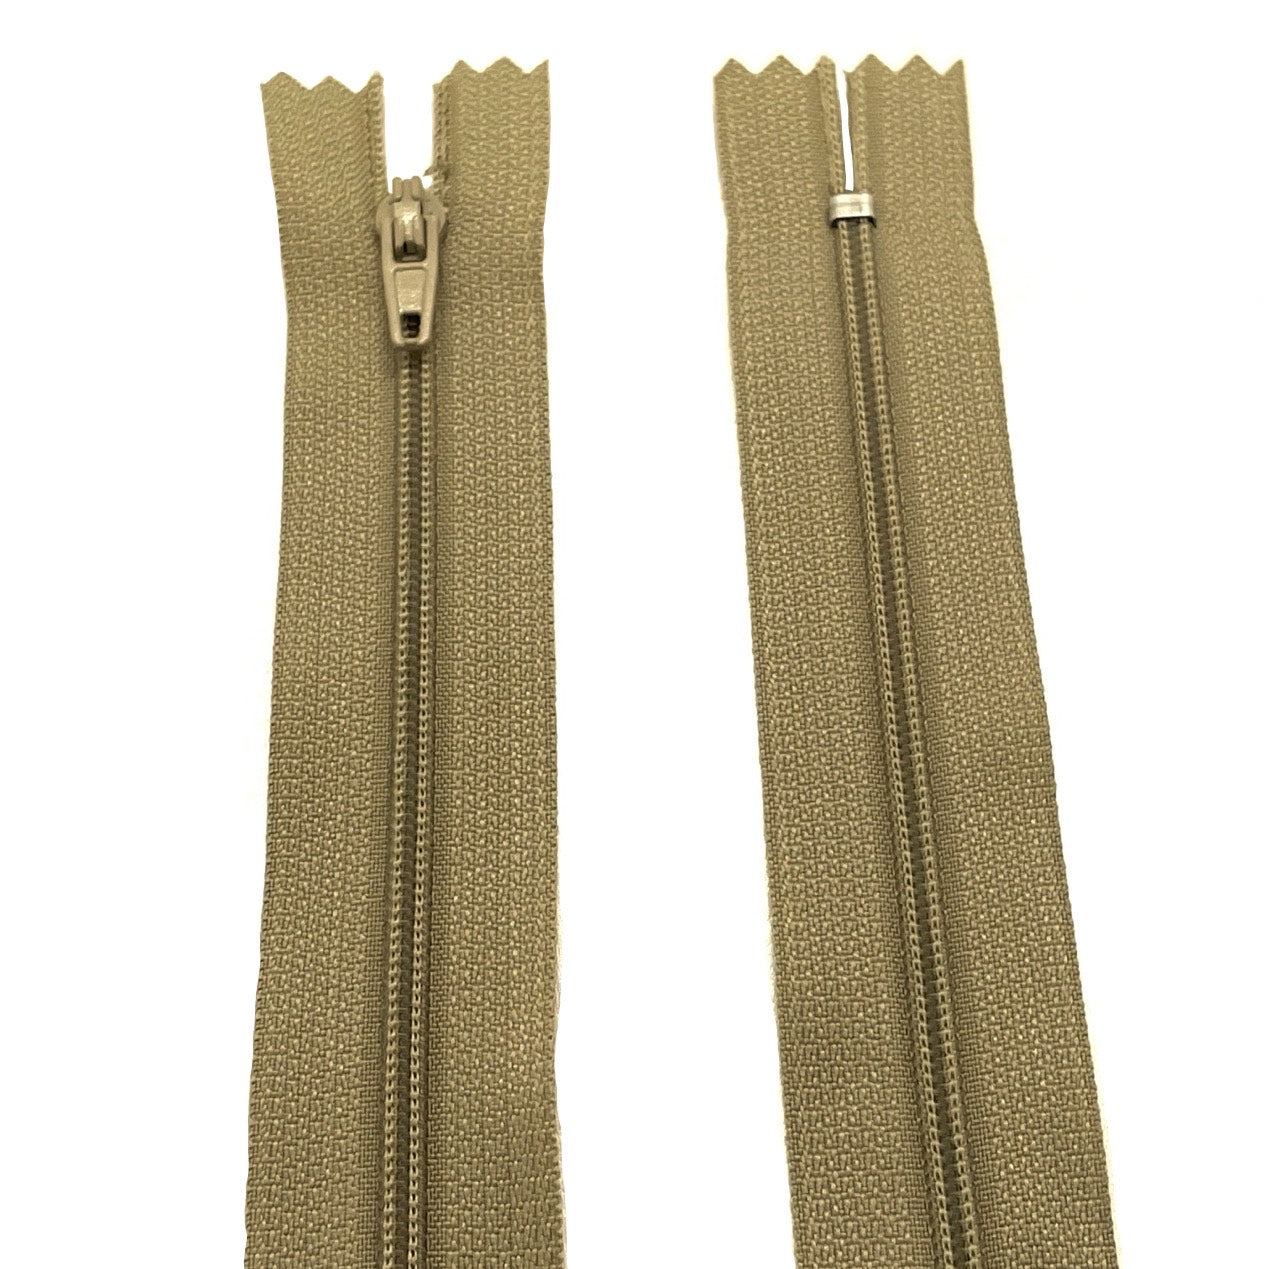 Photo of beige nylon zips available in 25 colors and 5 sizes. Excellent quality zippers for craft and dressmaking purposes. Perfect for dresses, skirts, trousers, bags, purses, cushions, and numerous other projects. So many possibilities, so little time!